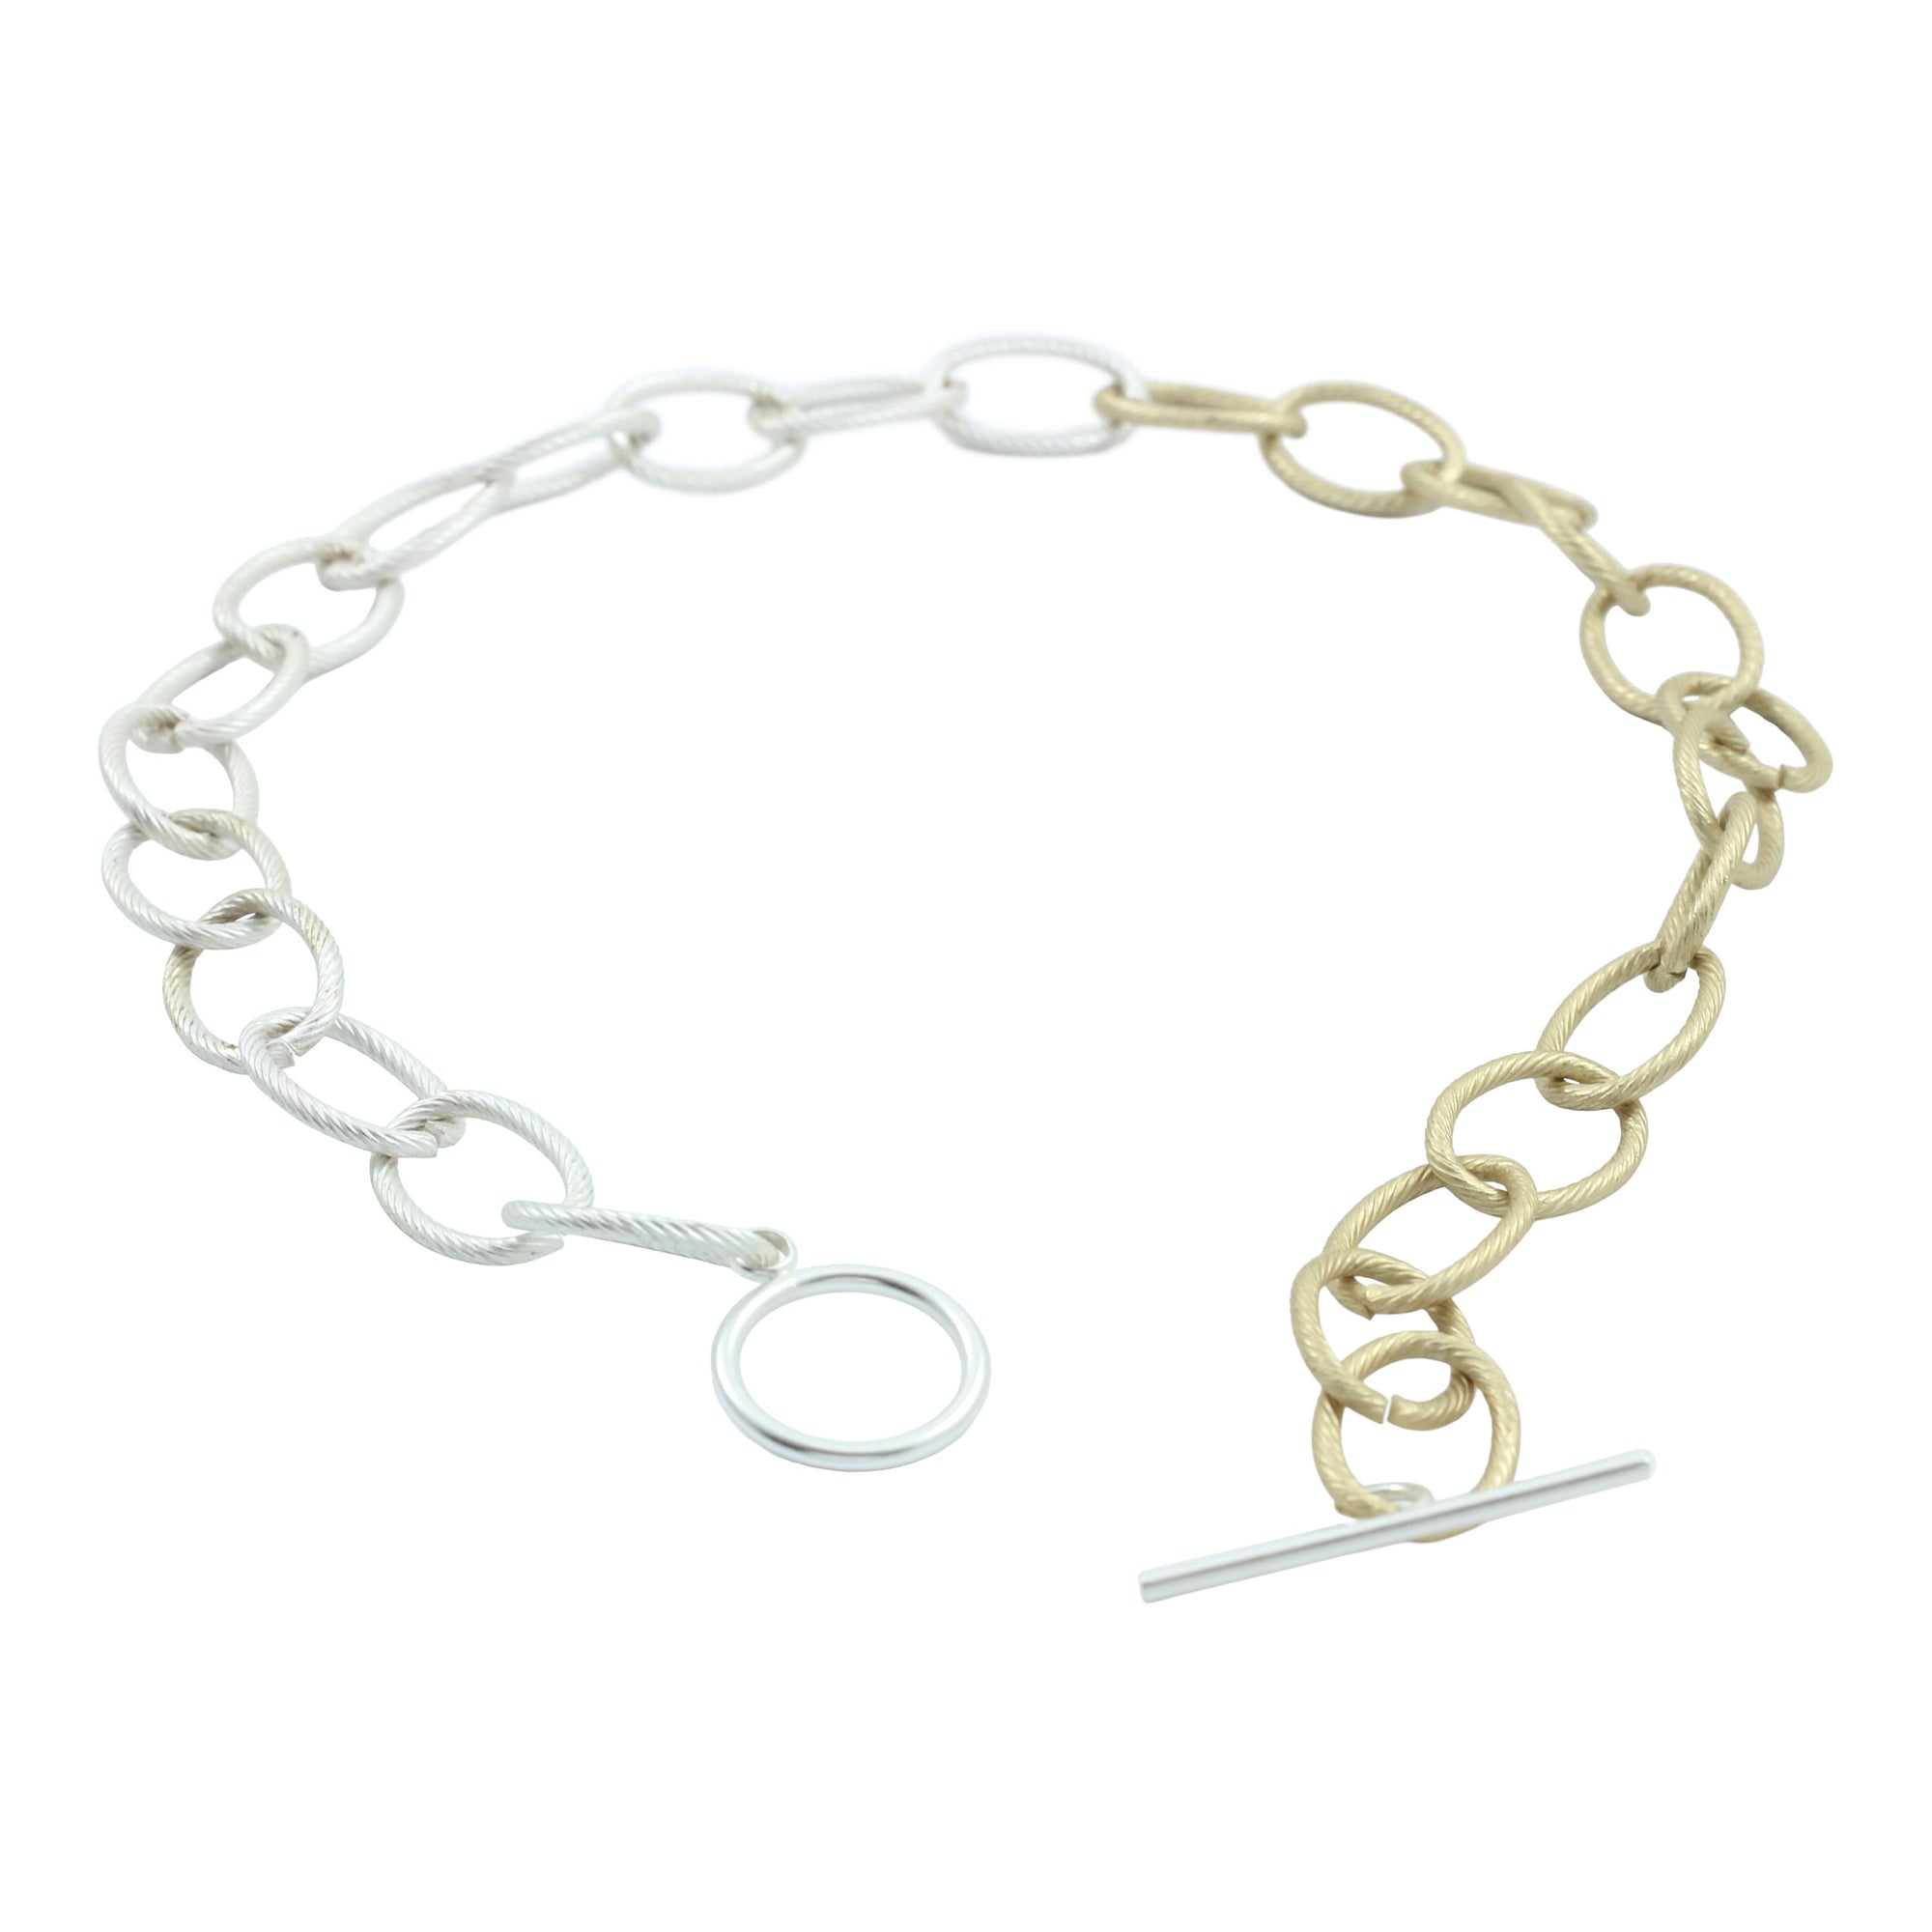 "L'Or" Gold and Silver Mixed Metal Chunky Choker Chain Necklace